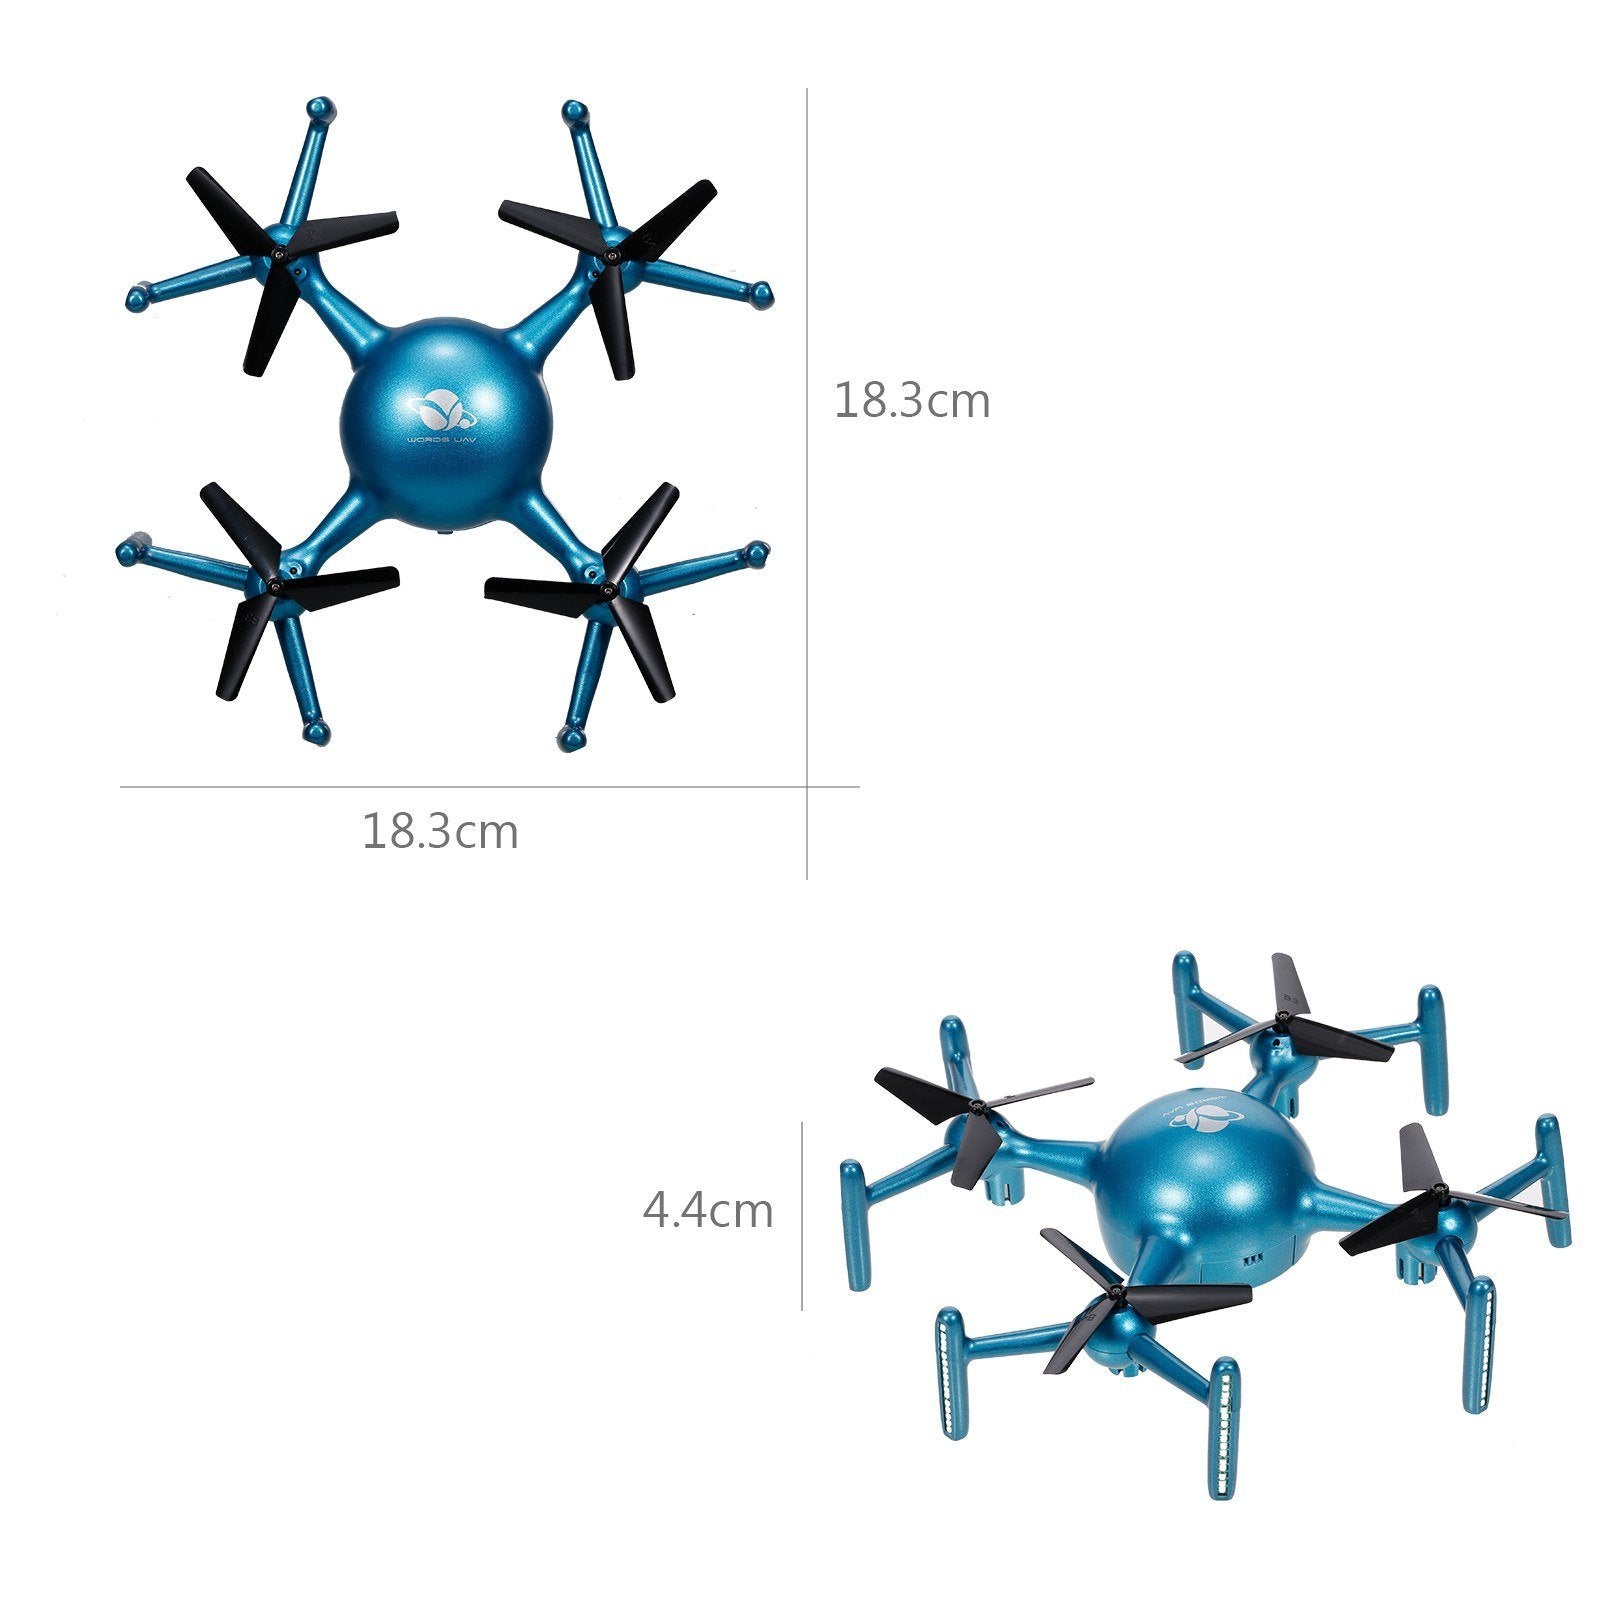 LED Drone RC Height Hold 2.4GHz Remote Control with Lights APP Programming